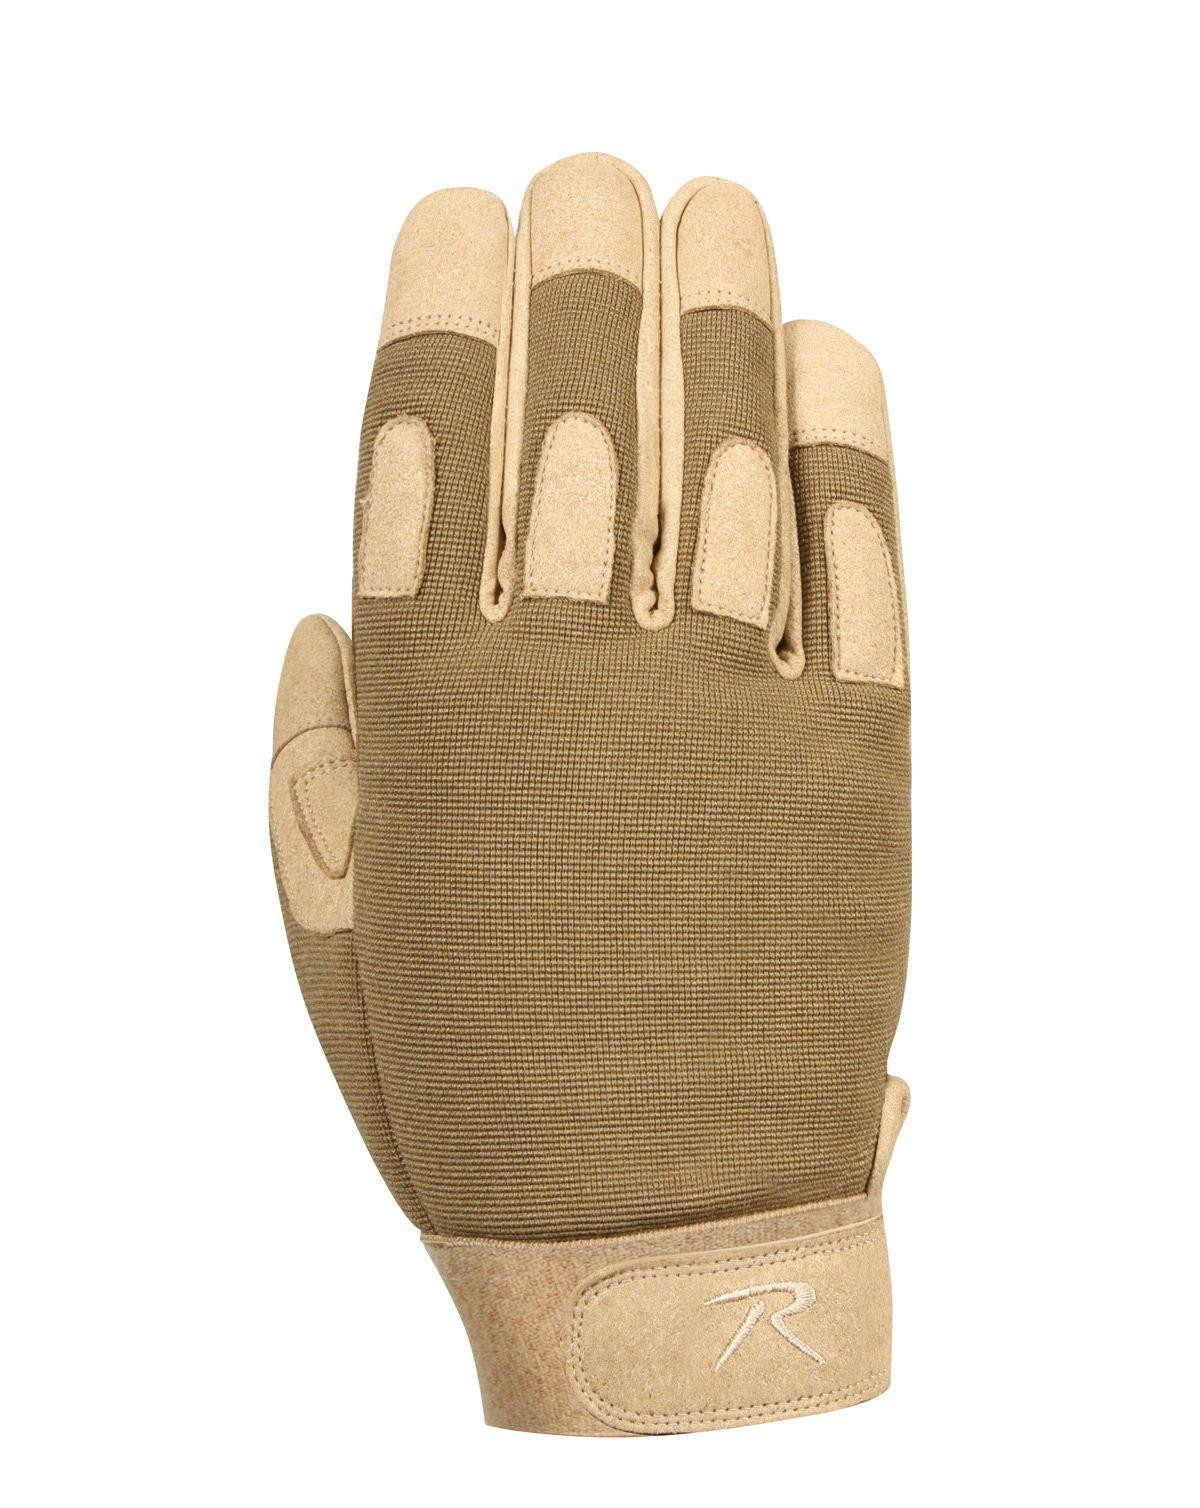 9: Rothco Lightweight Duty Handsker (Coyote Brun, L)